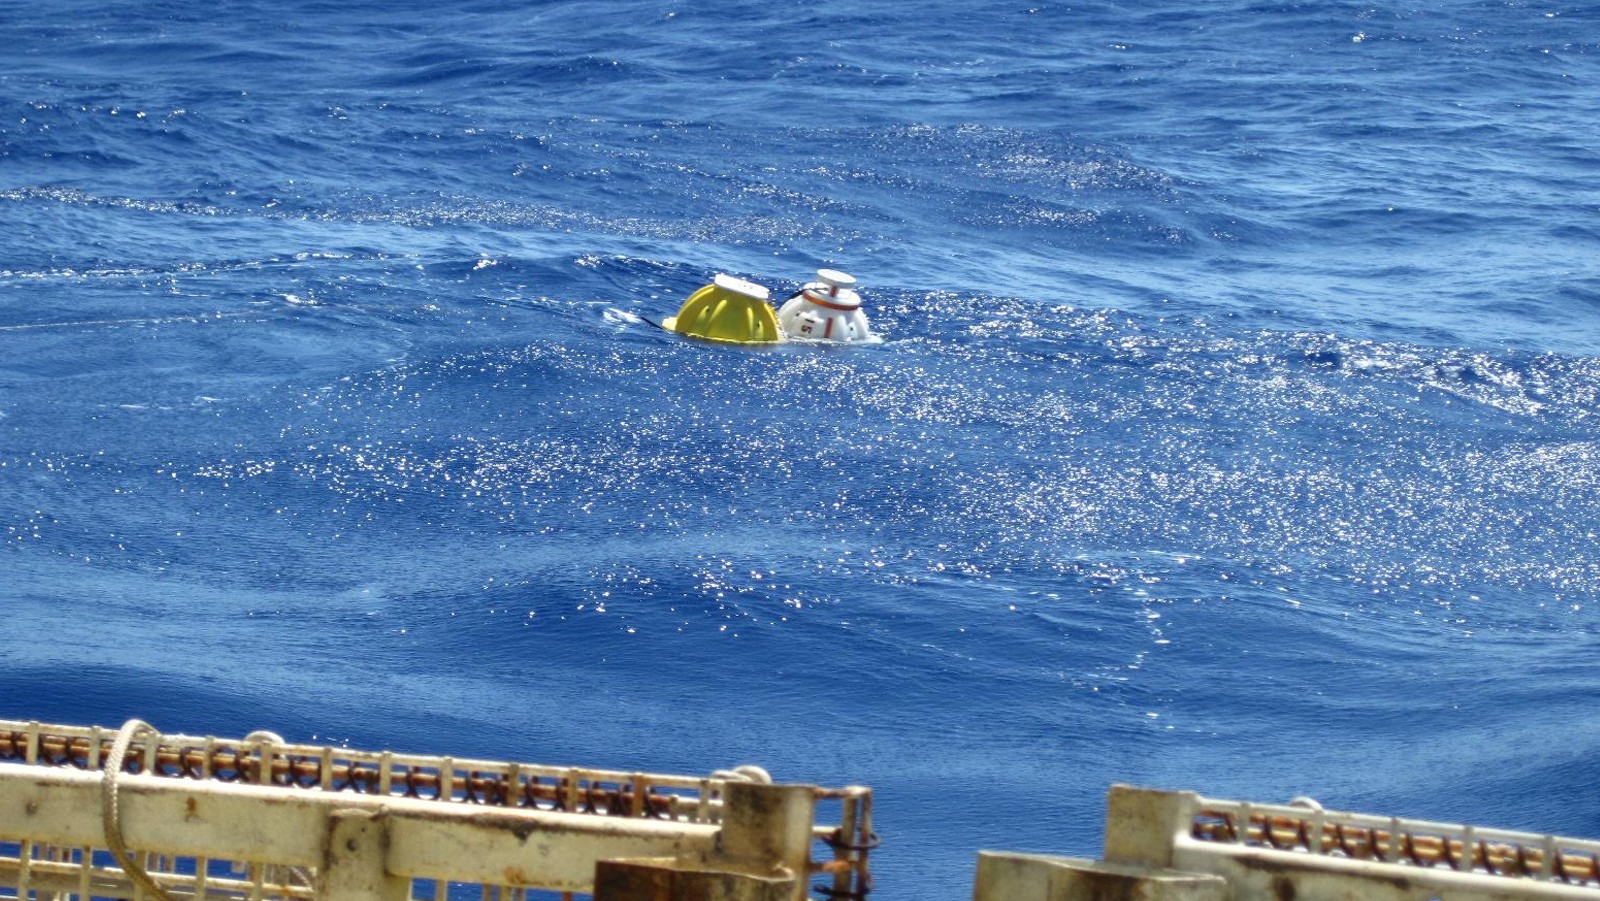 The ABIISS prototype successfully recovered after 18 months nearly three miles down on the bottom of the ocean. Image credit: NOAA